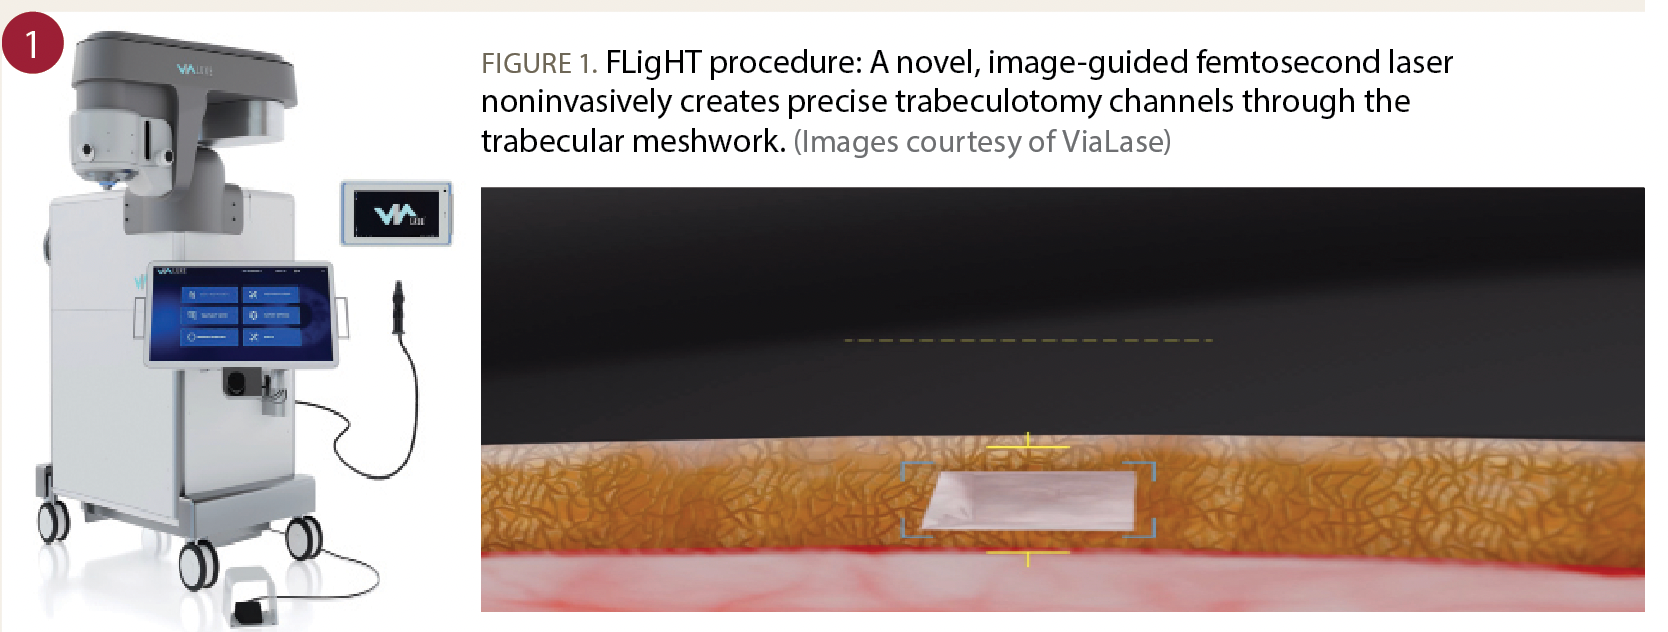 A novel, image-guided femtosecond laser  noninvasively creates precise trabeculotomy channels through the trabecular meshwork